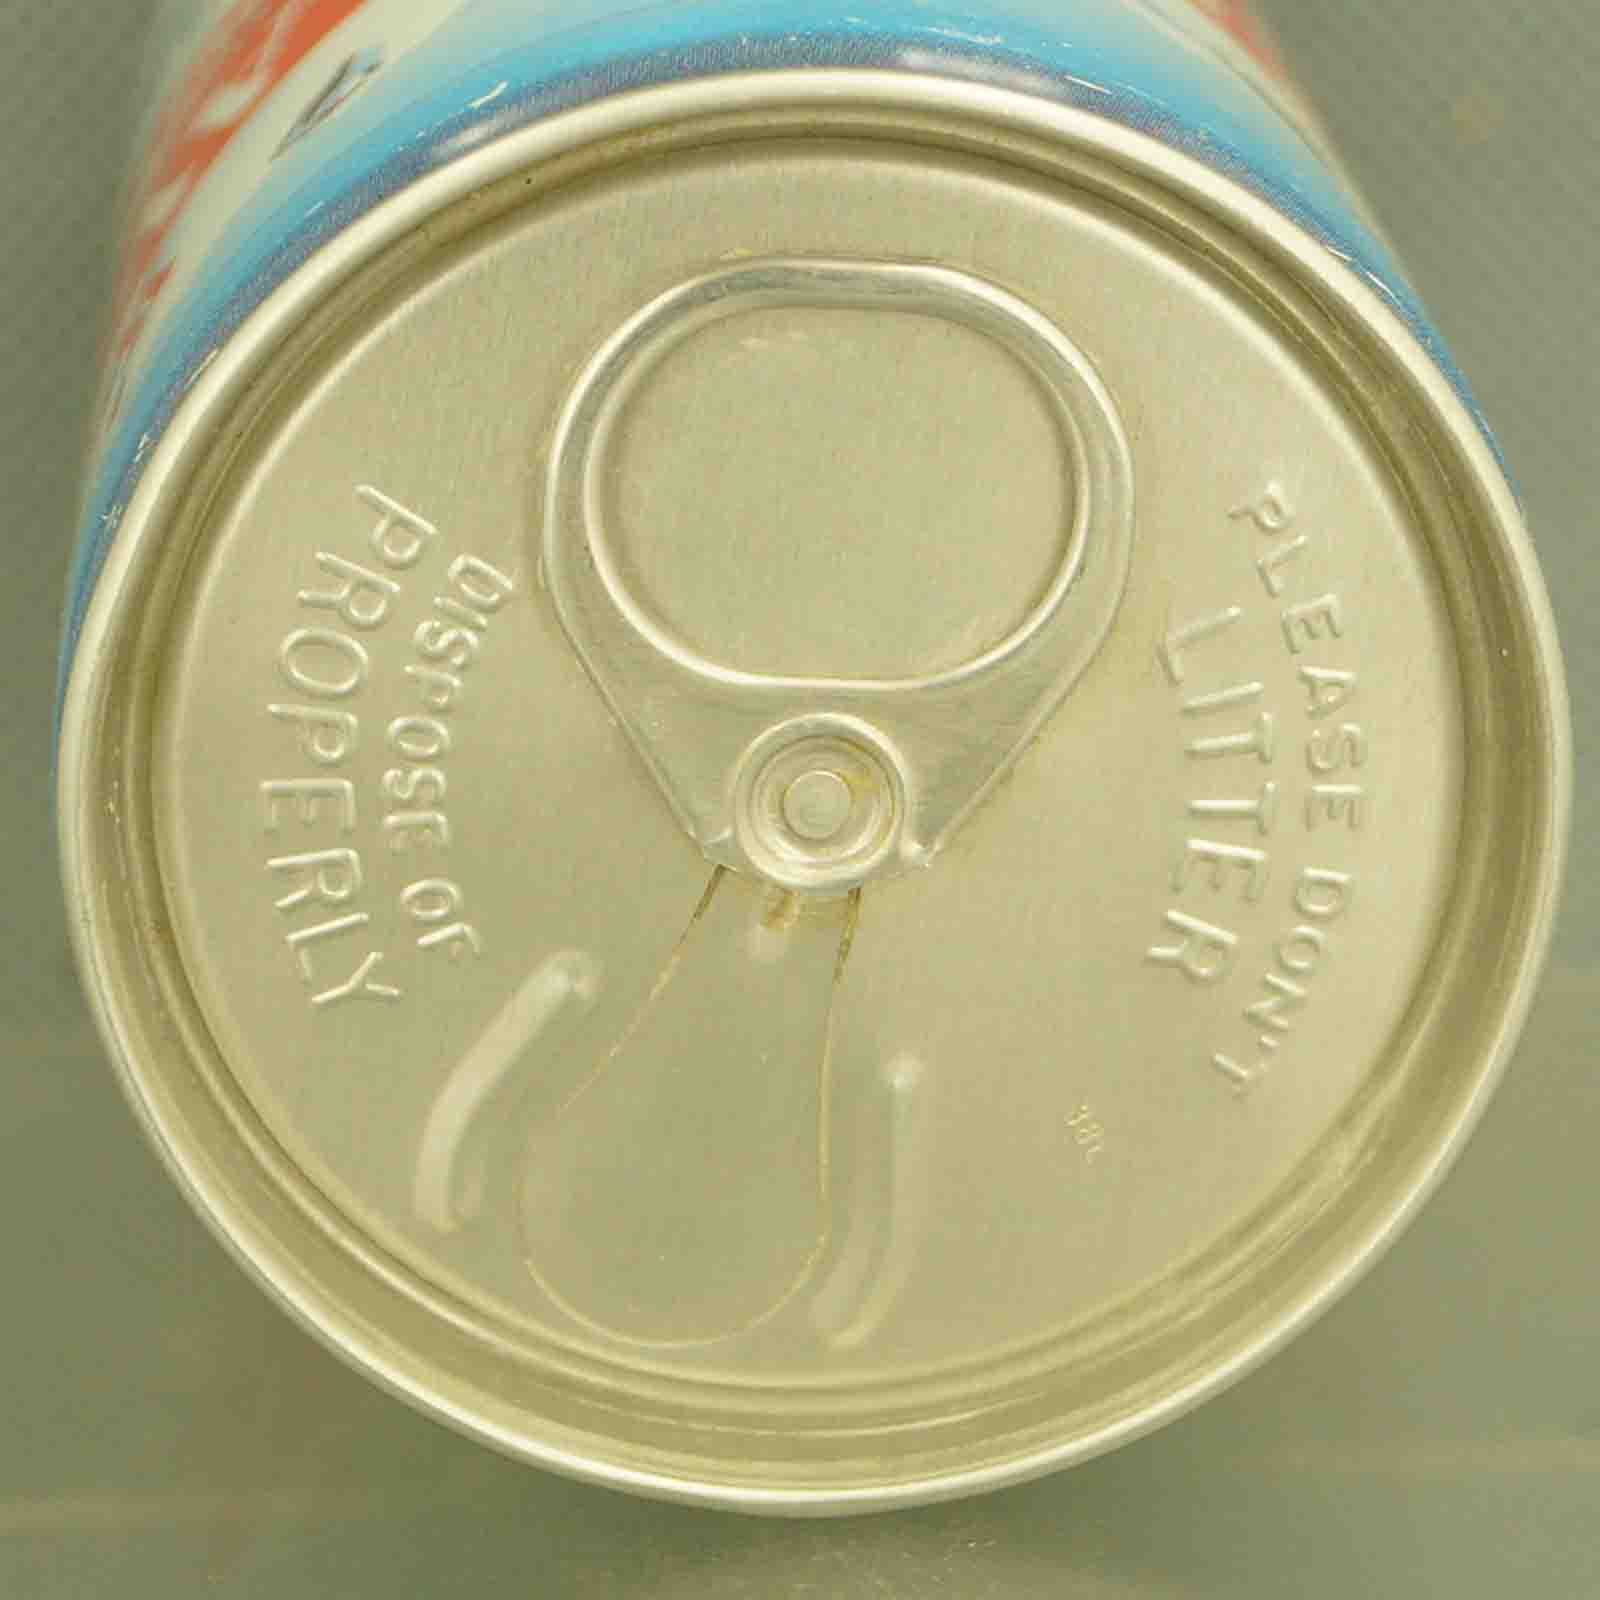 weiss bavarian pull tab beer can 5